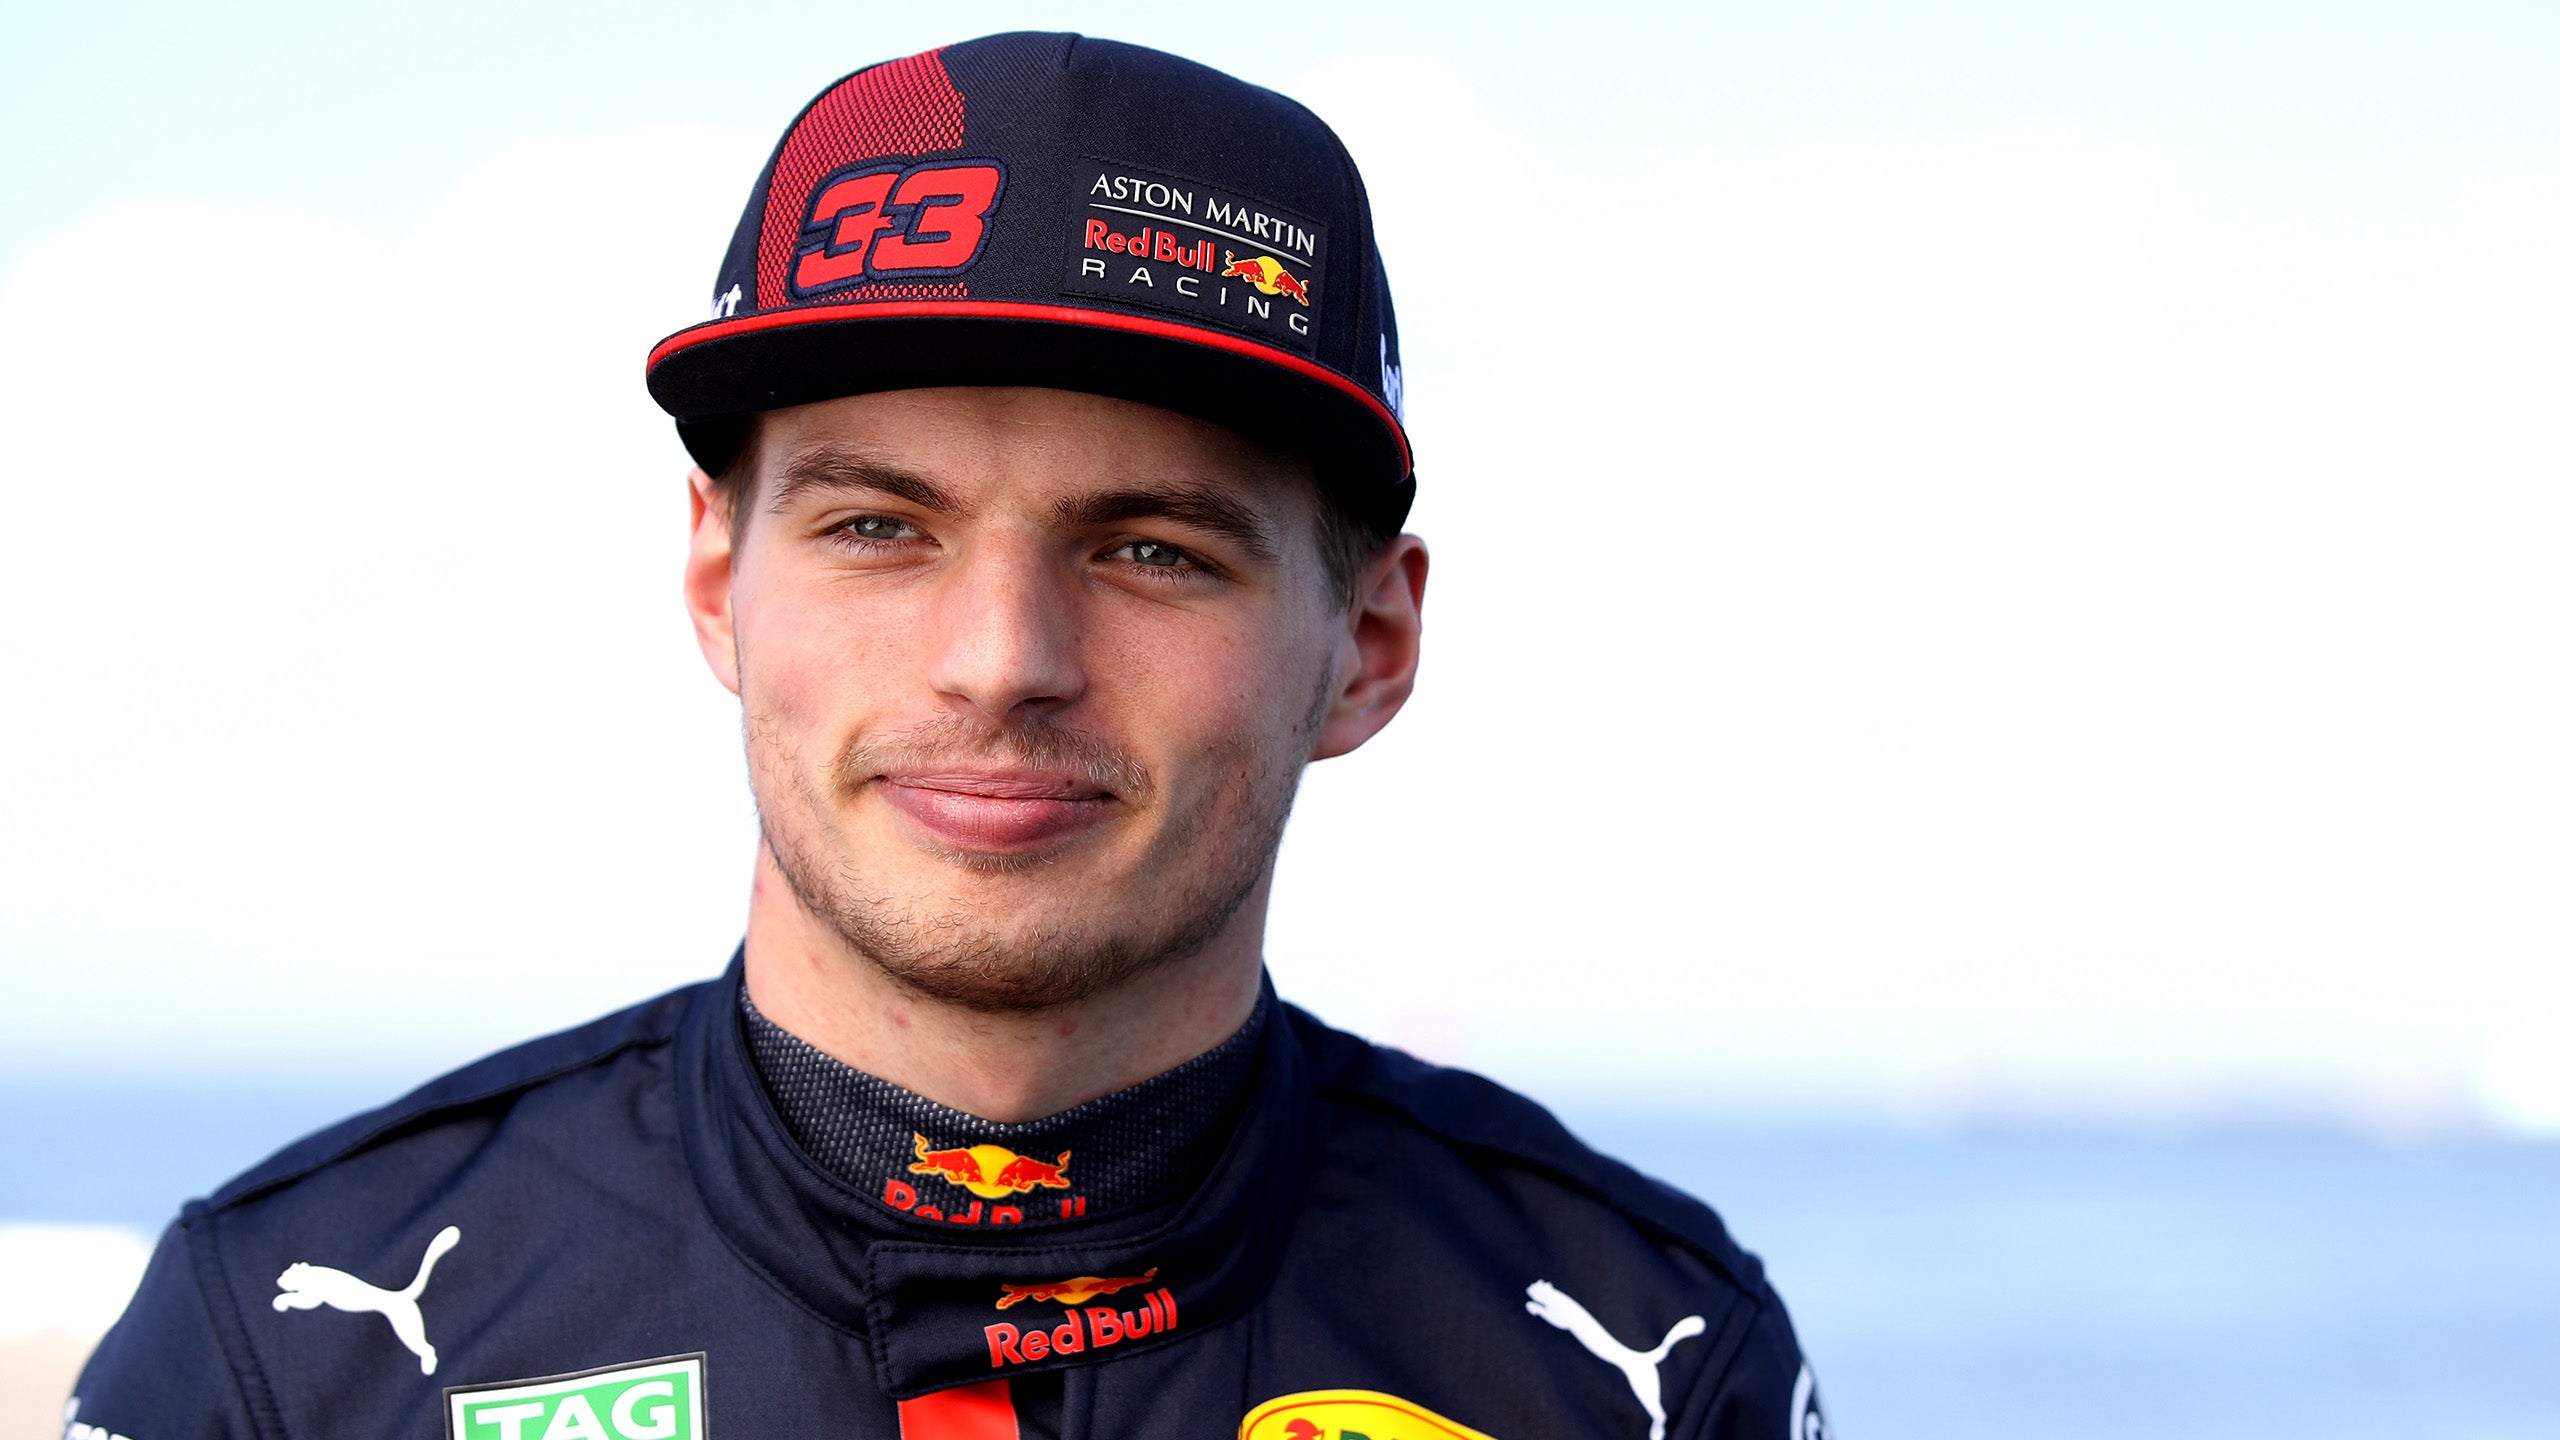 Max Verstappen to Other F1 Teams on Red Bull Overspending: ‘Keep Your Mouth Shut’